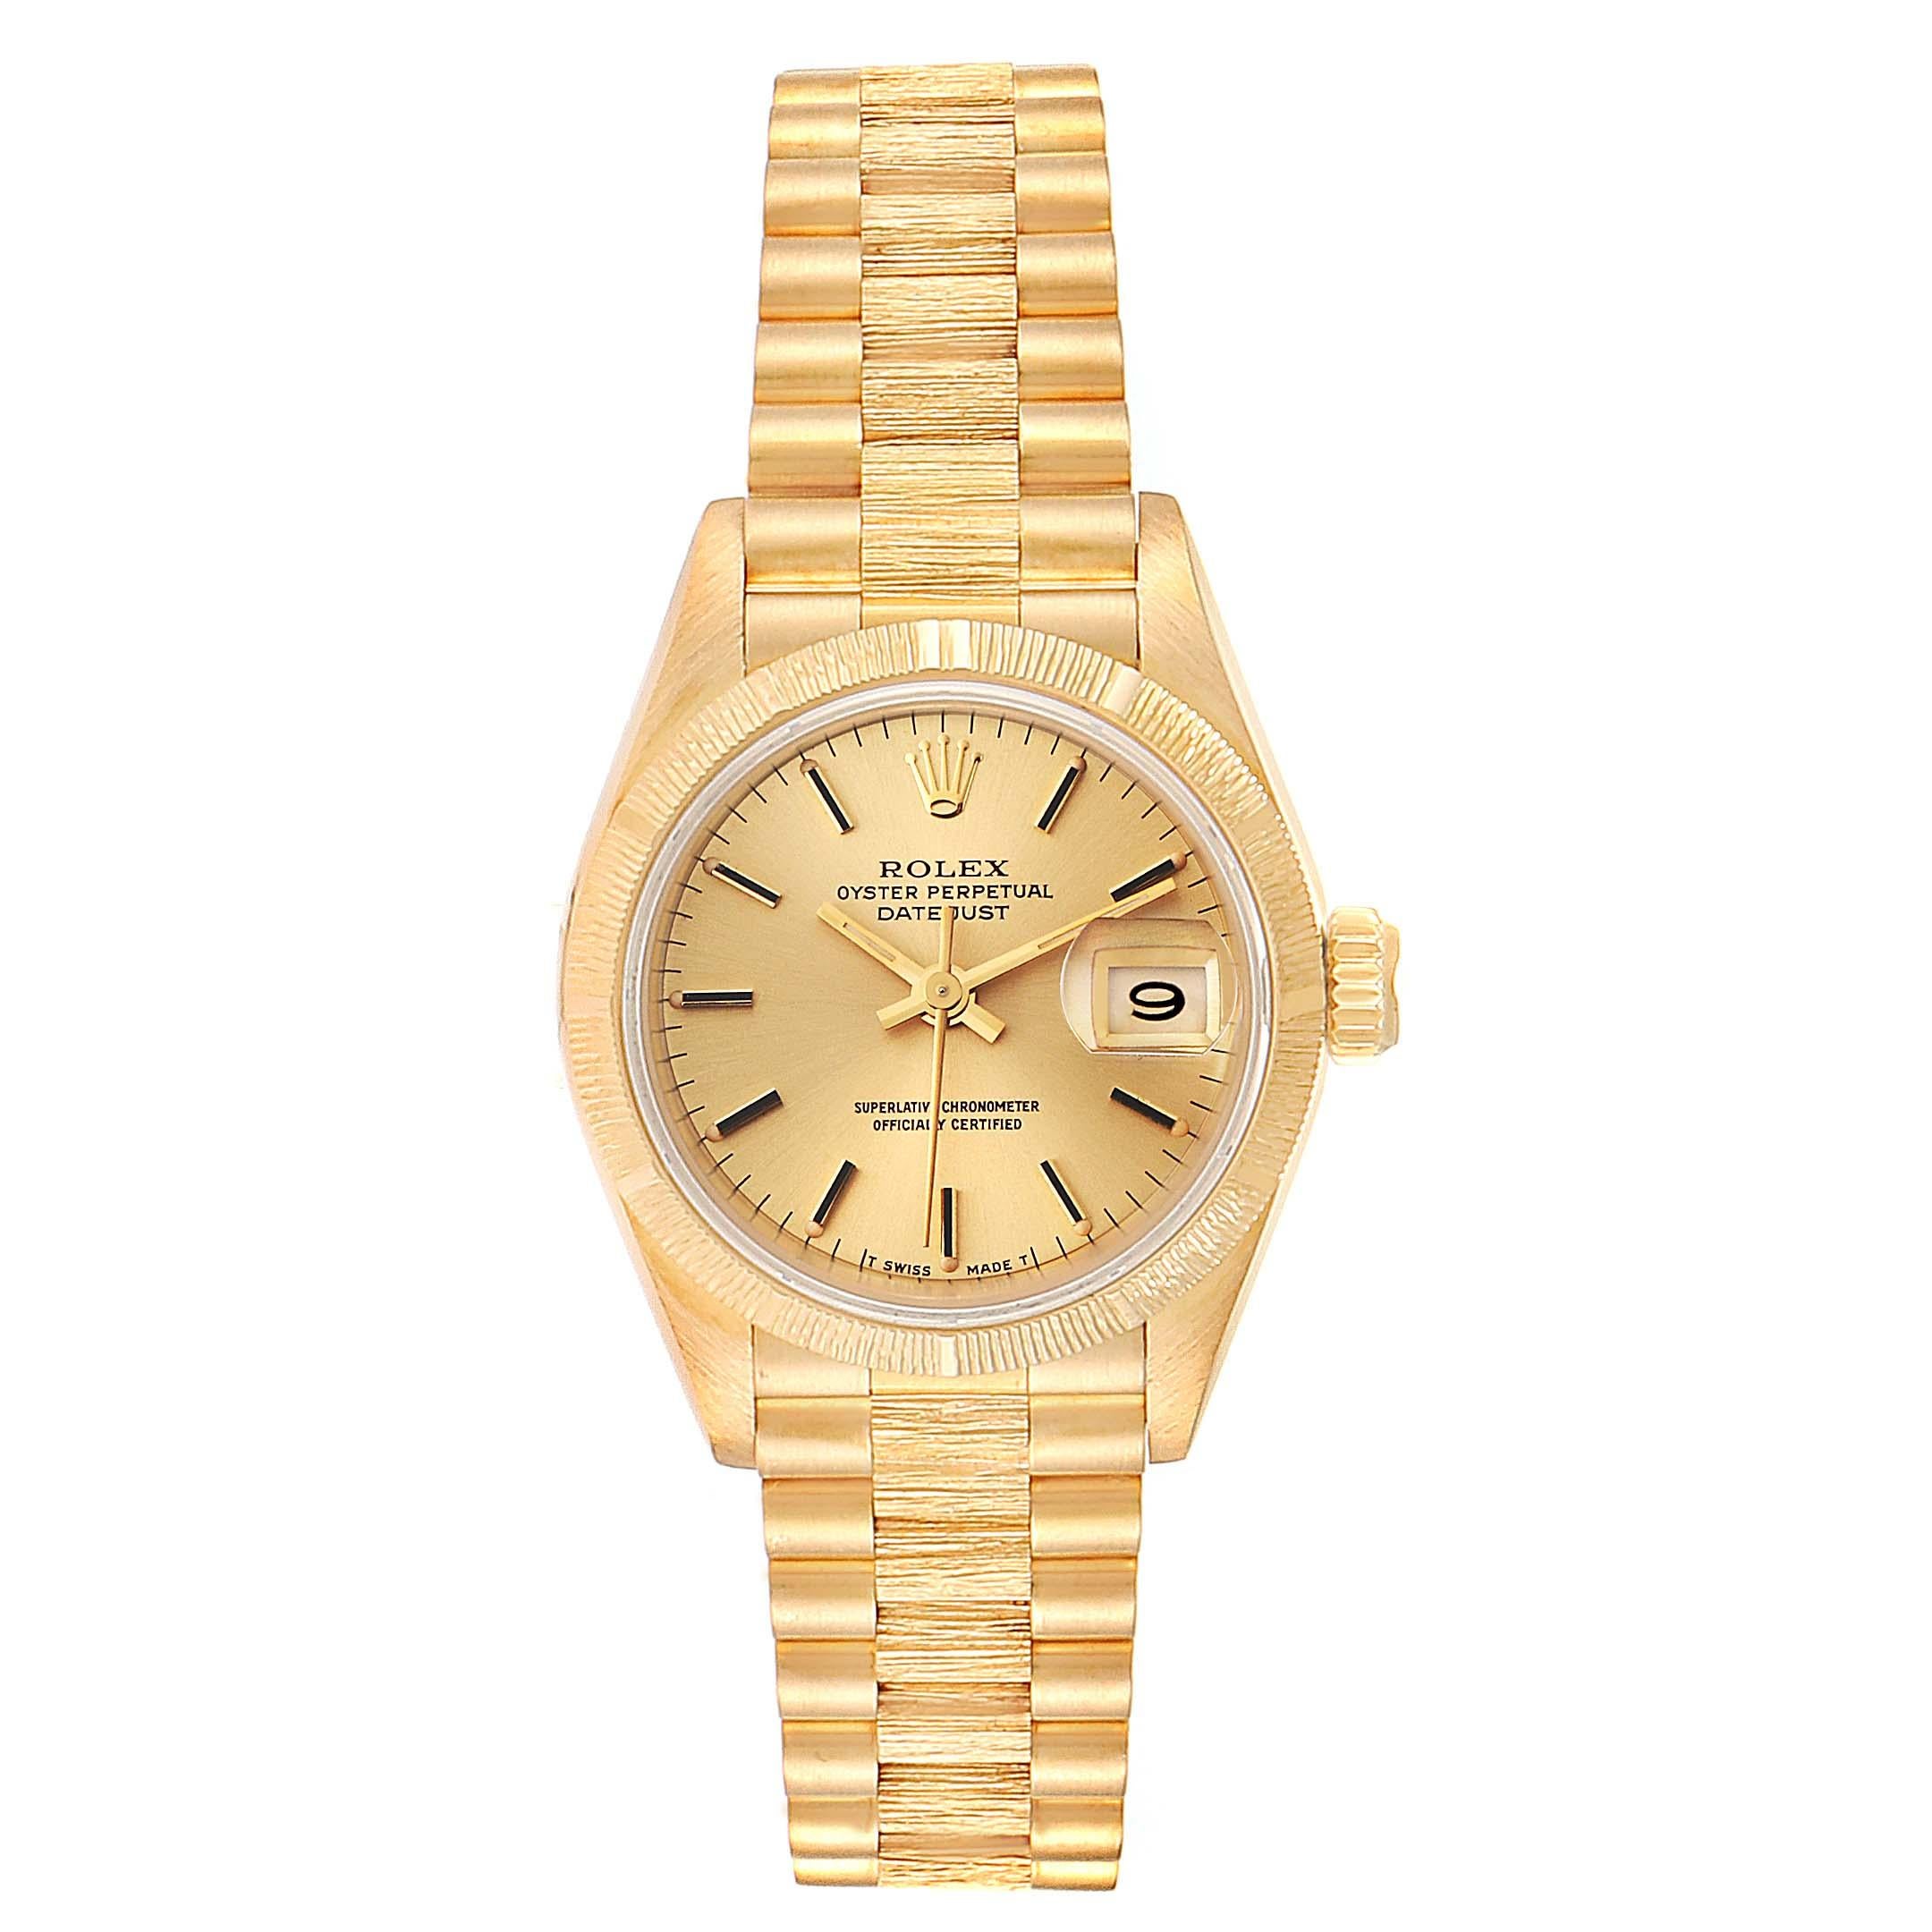 Rolex President Datejust 18K Yellow Gold Ladies Watch 69278. Officially certified chronometer self-winding movement. 18k yellow gold oyster case 26.0 mm in diameter. Rolex logo on a crown. 18k yellow gold engine turned bezel. Scratch resistant